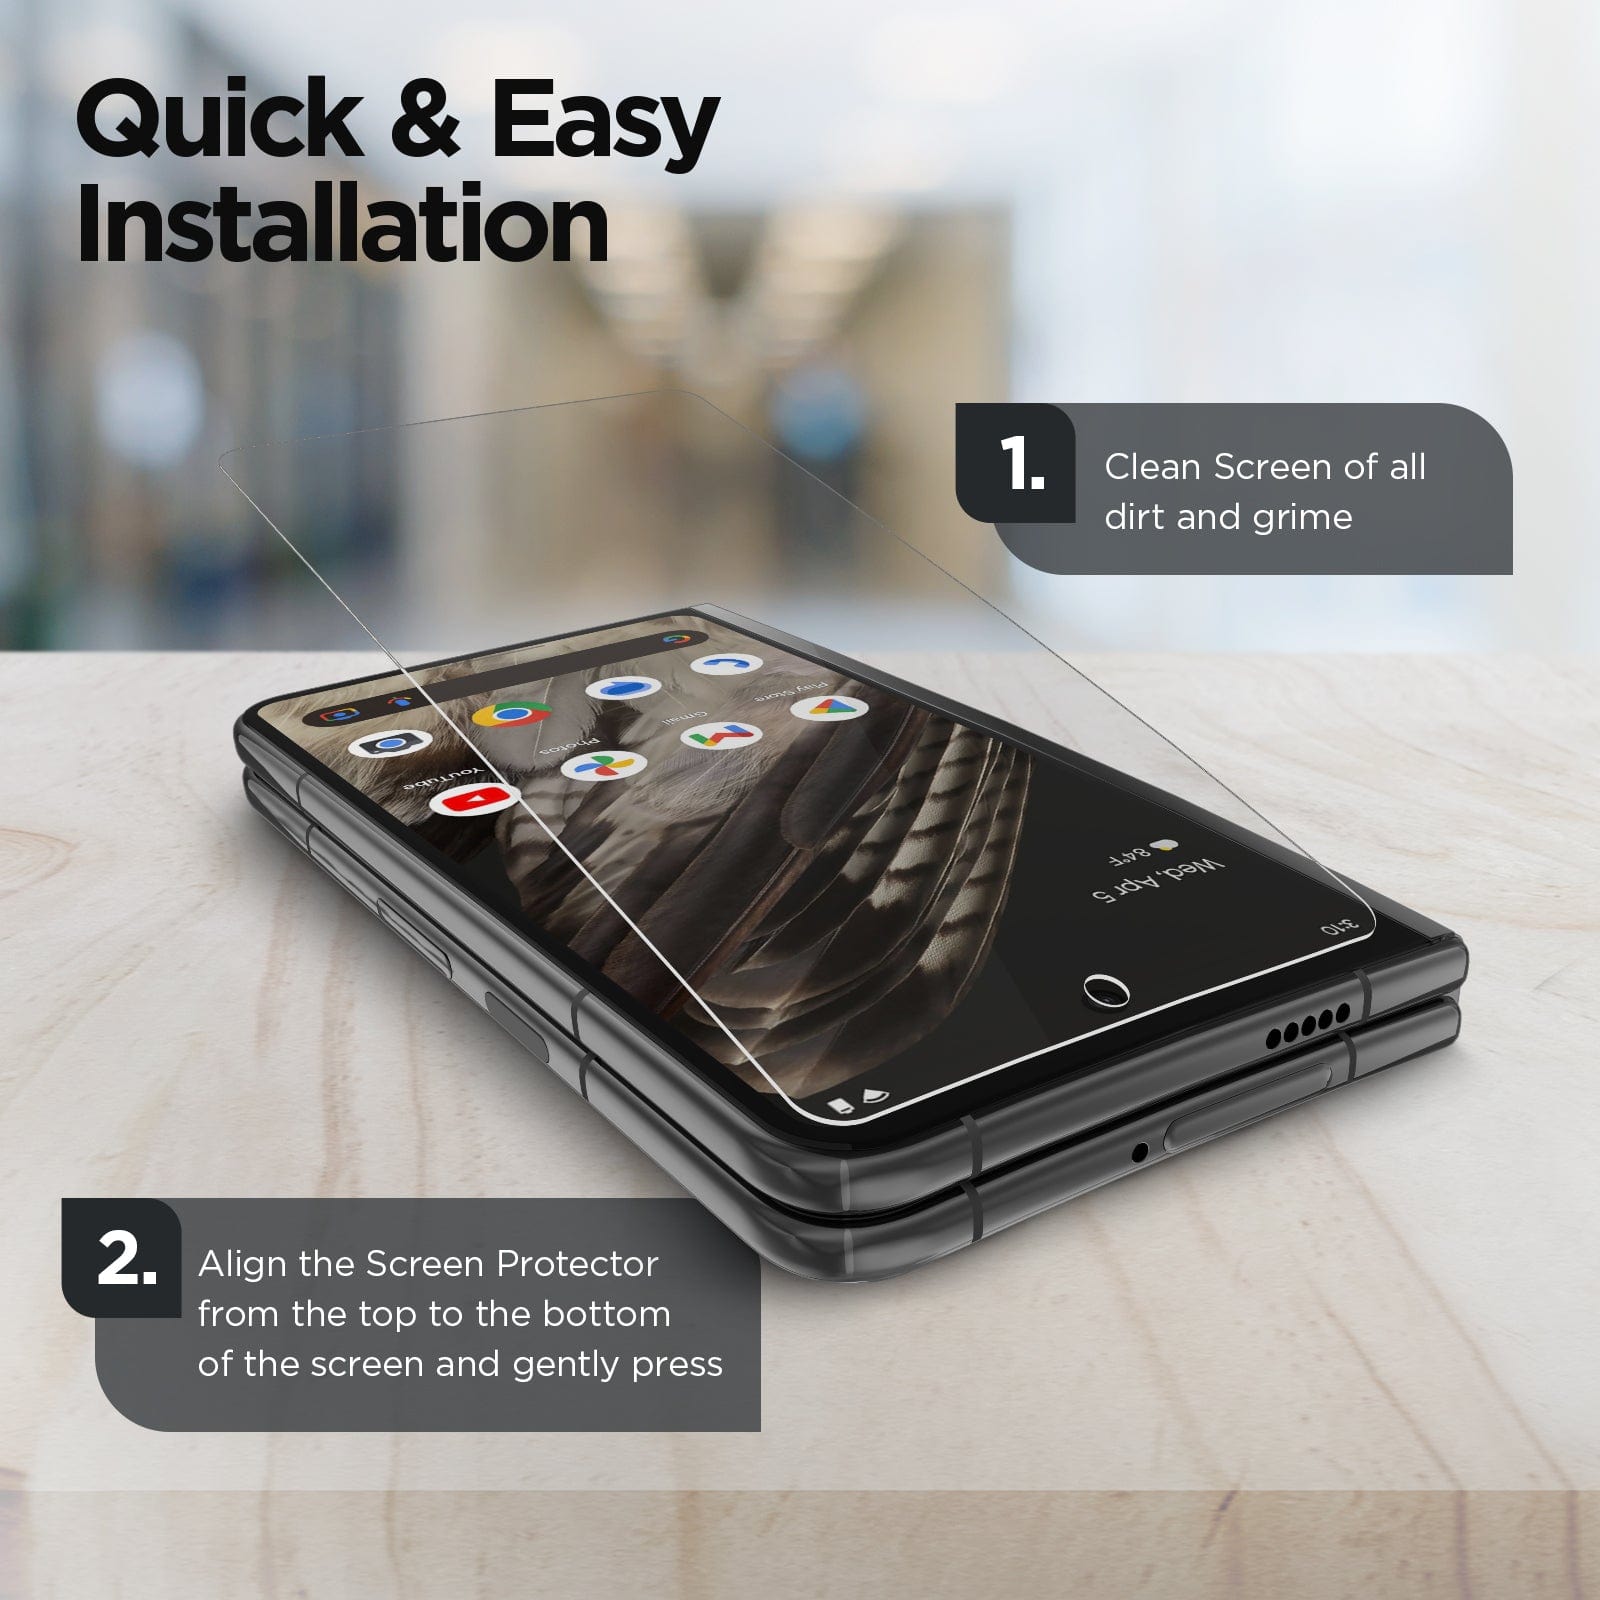 QUICK & EASY INSTALLATION. 1.CLEAN SCREEN OF ALL DIRT AND GRIME. 2. ALIGN THE SCREEN PROTECTOR FROM THE TOP TO THE BOTTOM OF THE SCREEN AND GENTLY PRESS.